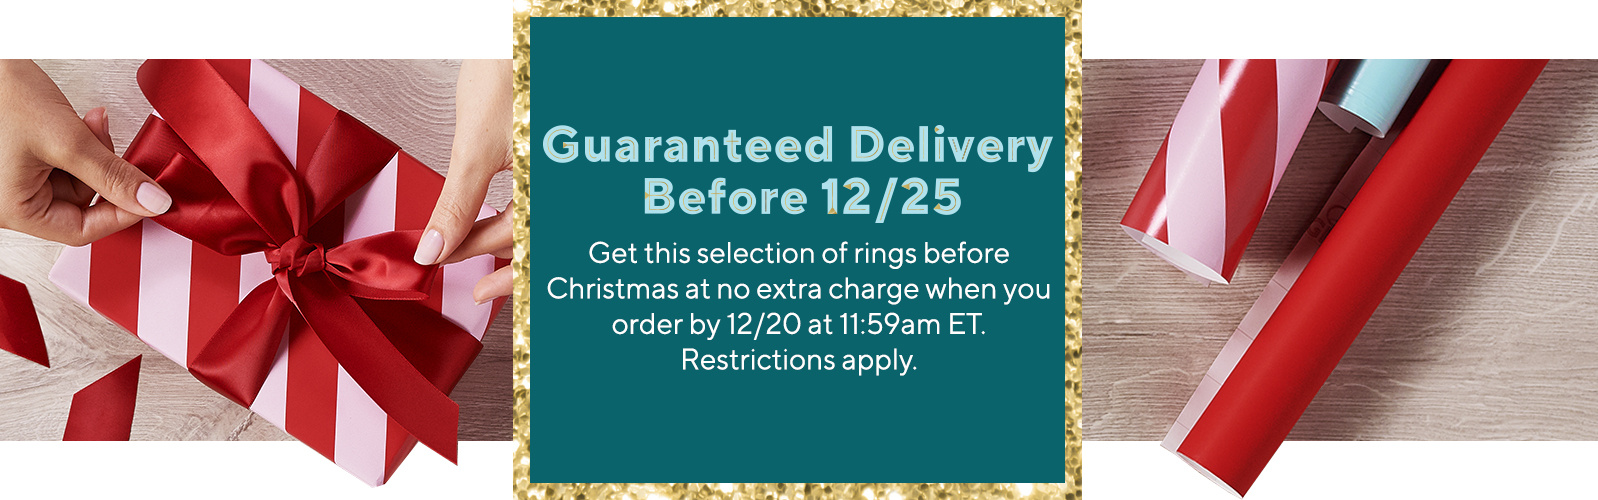 Guaranteed Delivery Before 12/25 Get this selection of rings before Christmas at no extra charge when you order by 12/20 at 11:59am ET. Restrictions apply.